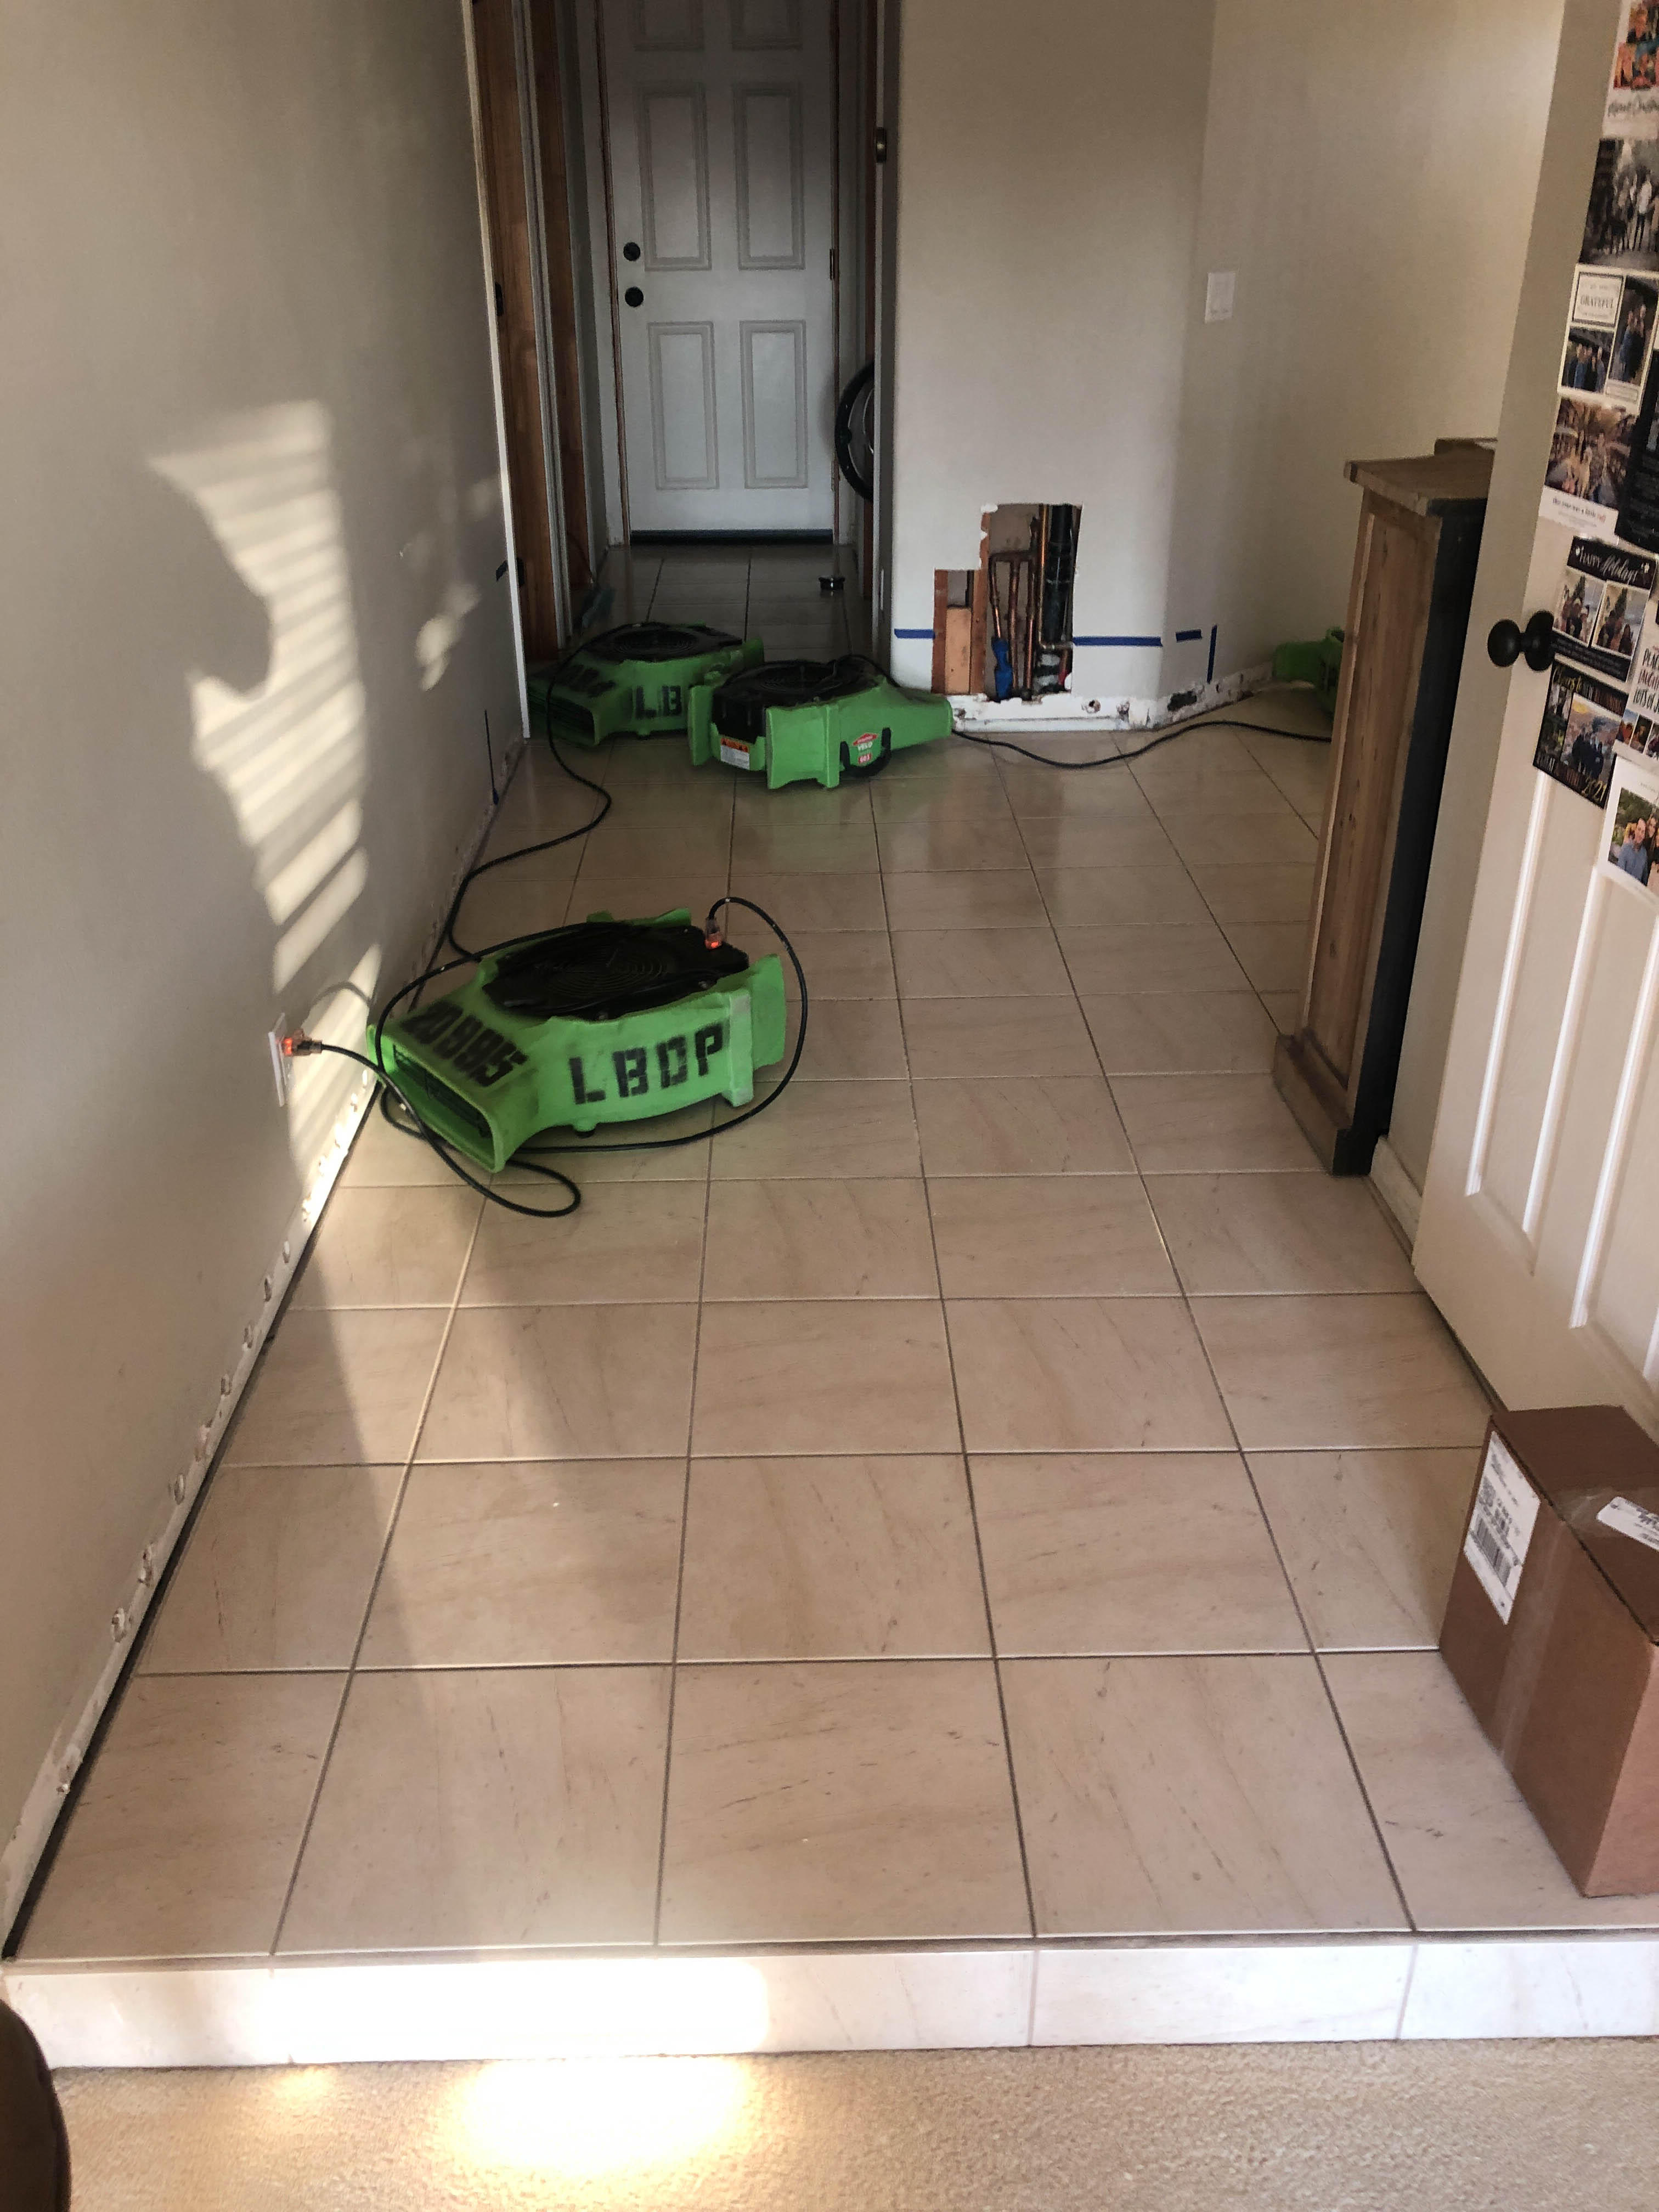 If you ever experience water damage give SERVPRO of Laguna Beach / Dana Point a call to make it "Like it never even happened